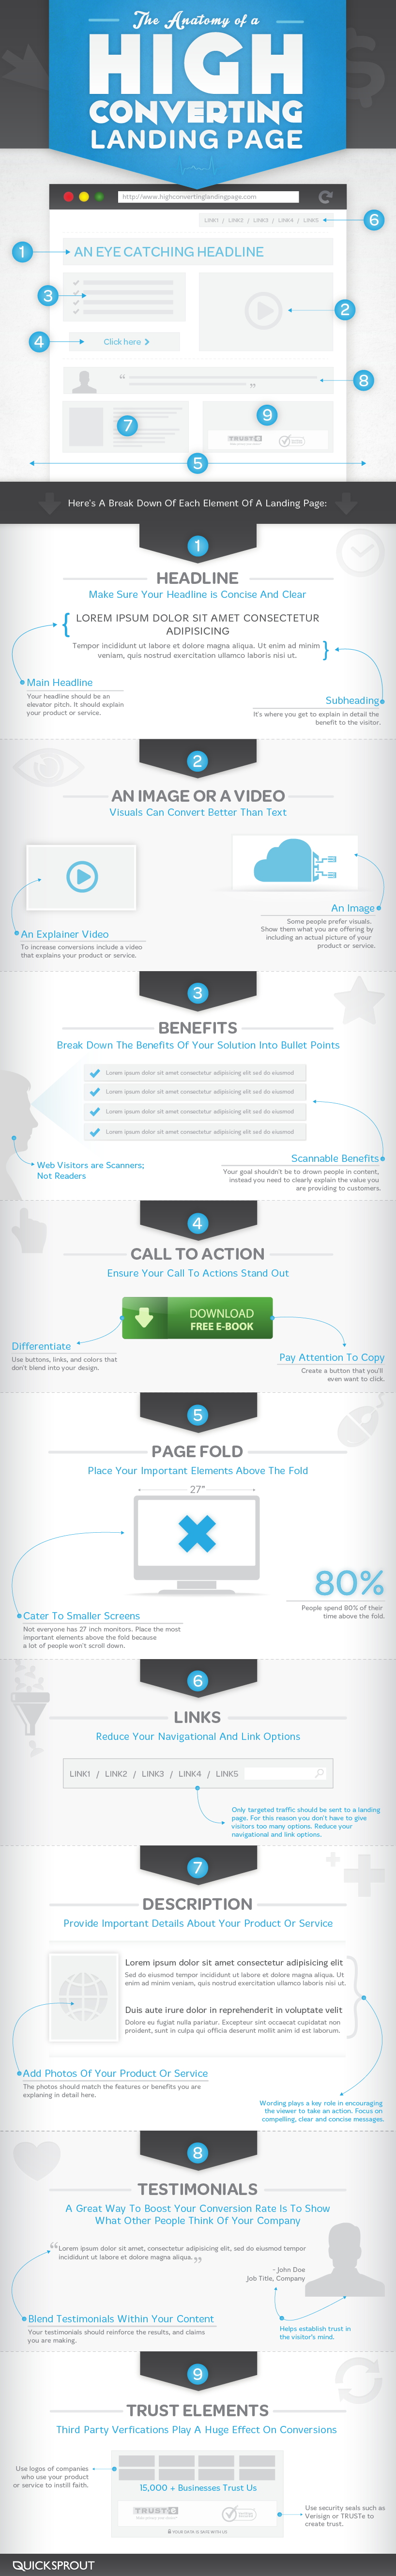 The Anatomy of high converting landing pages infographic.